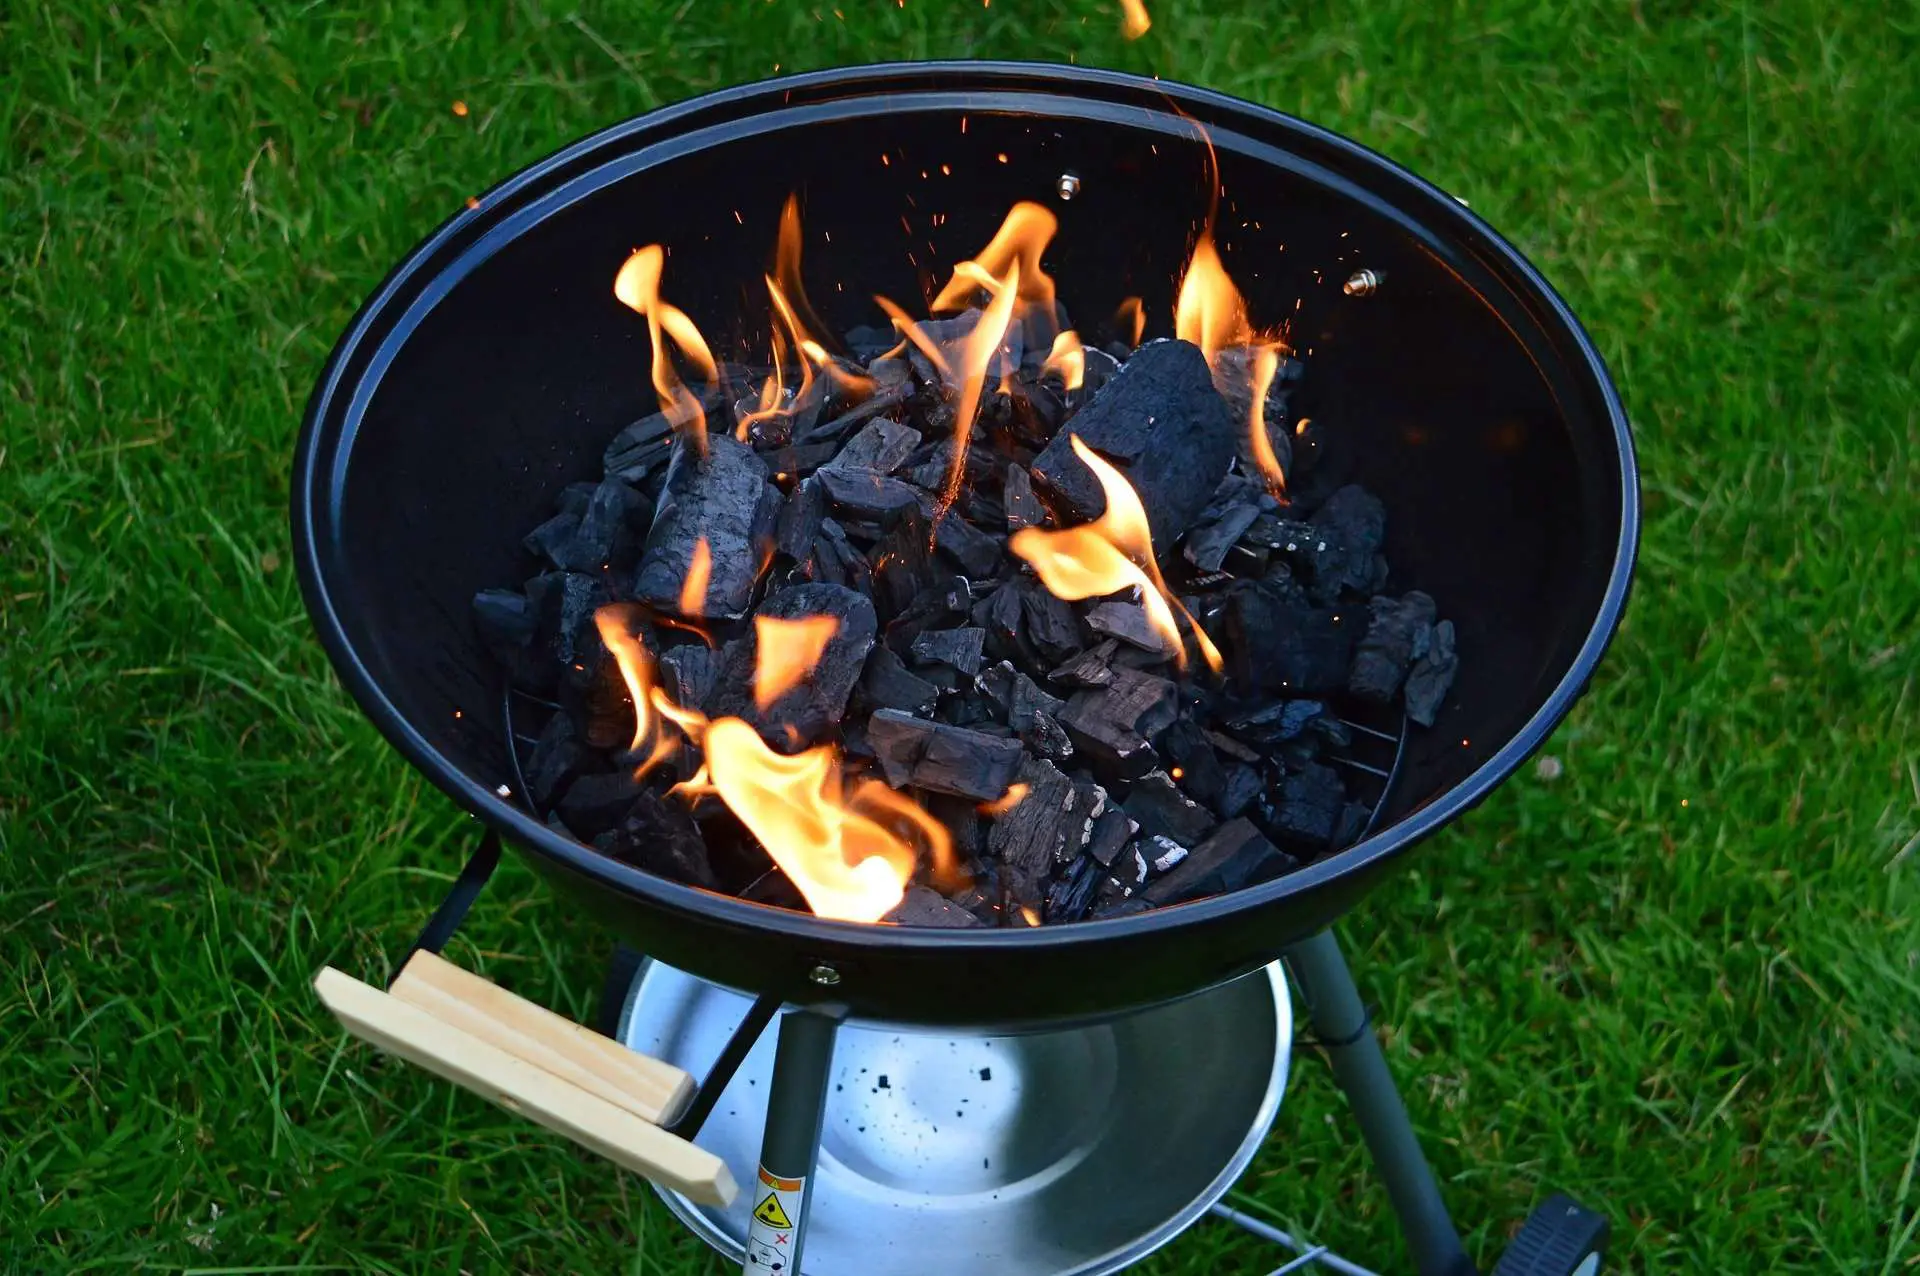 How to Clean a Charcoal Grill: The Best Techniques